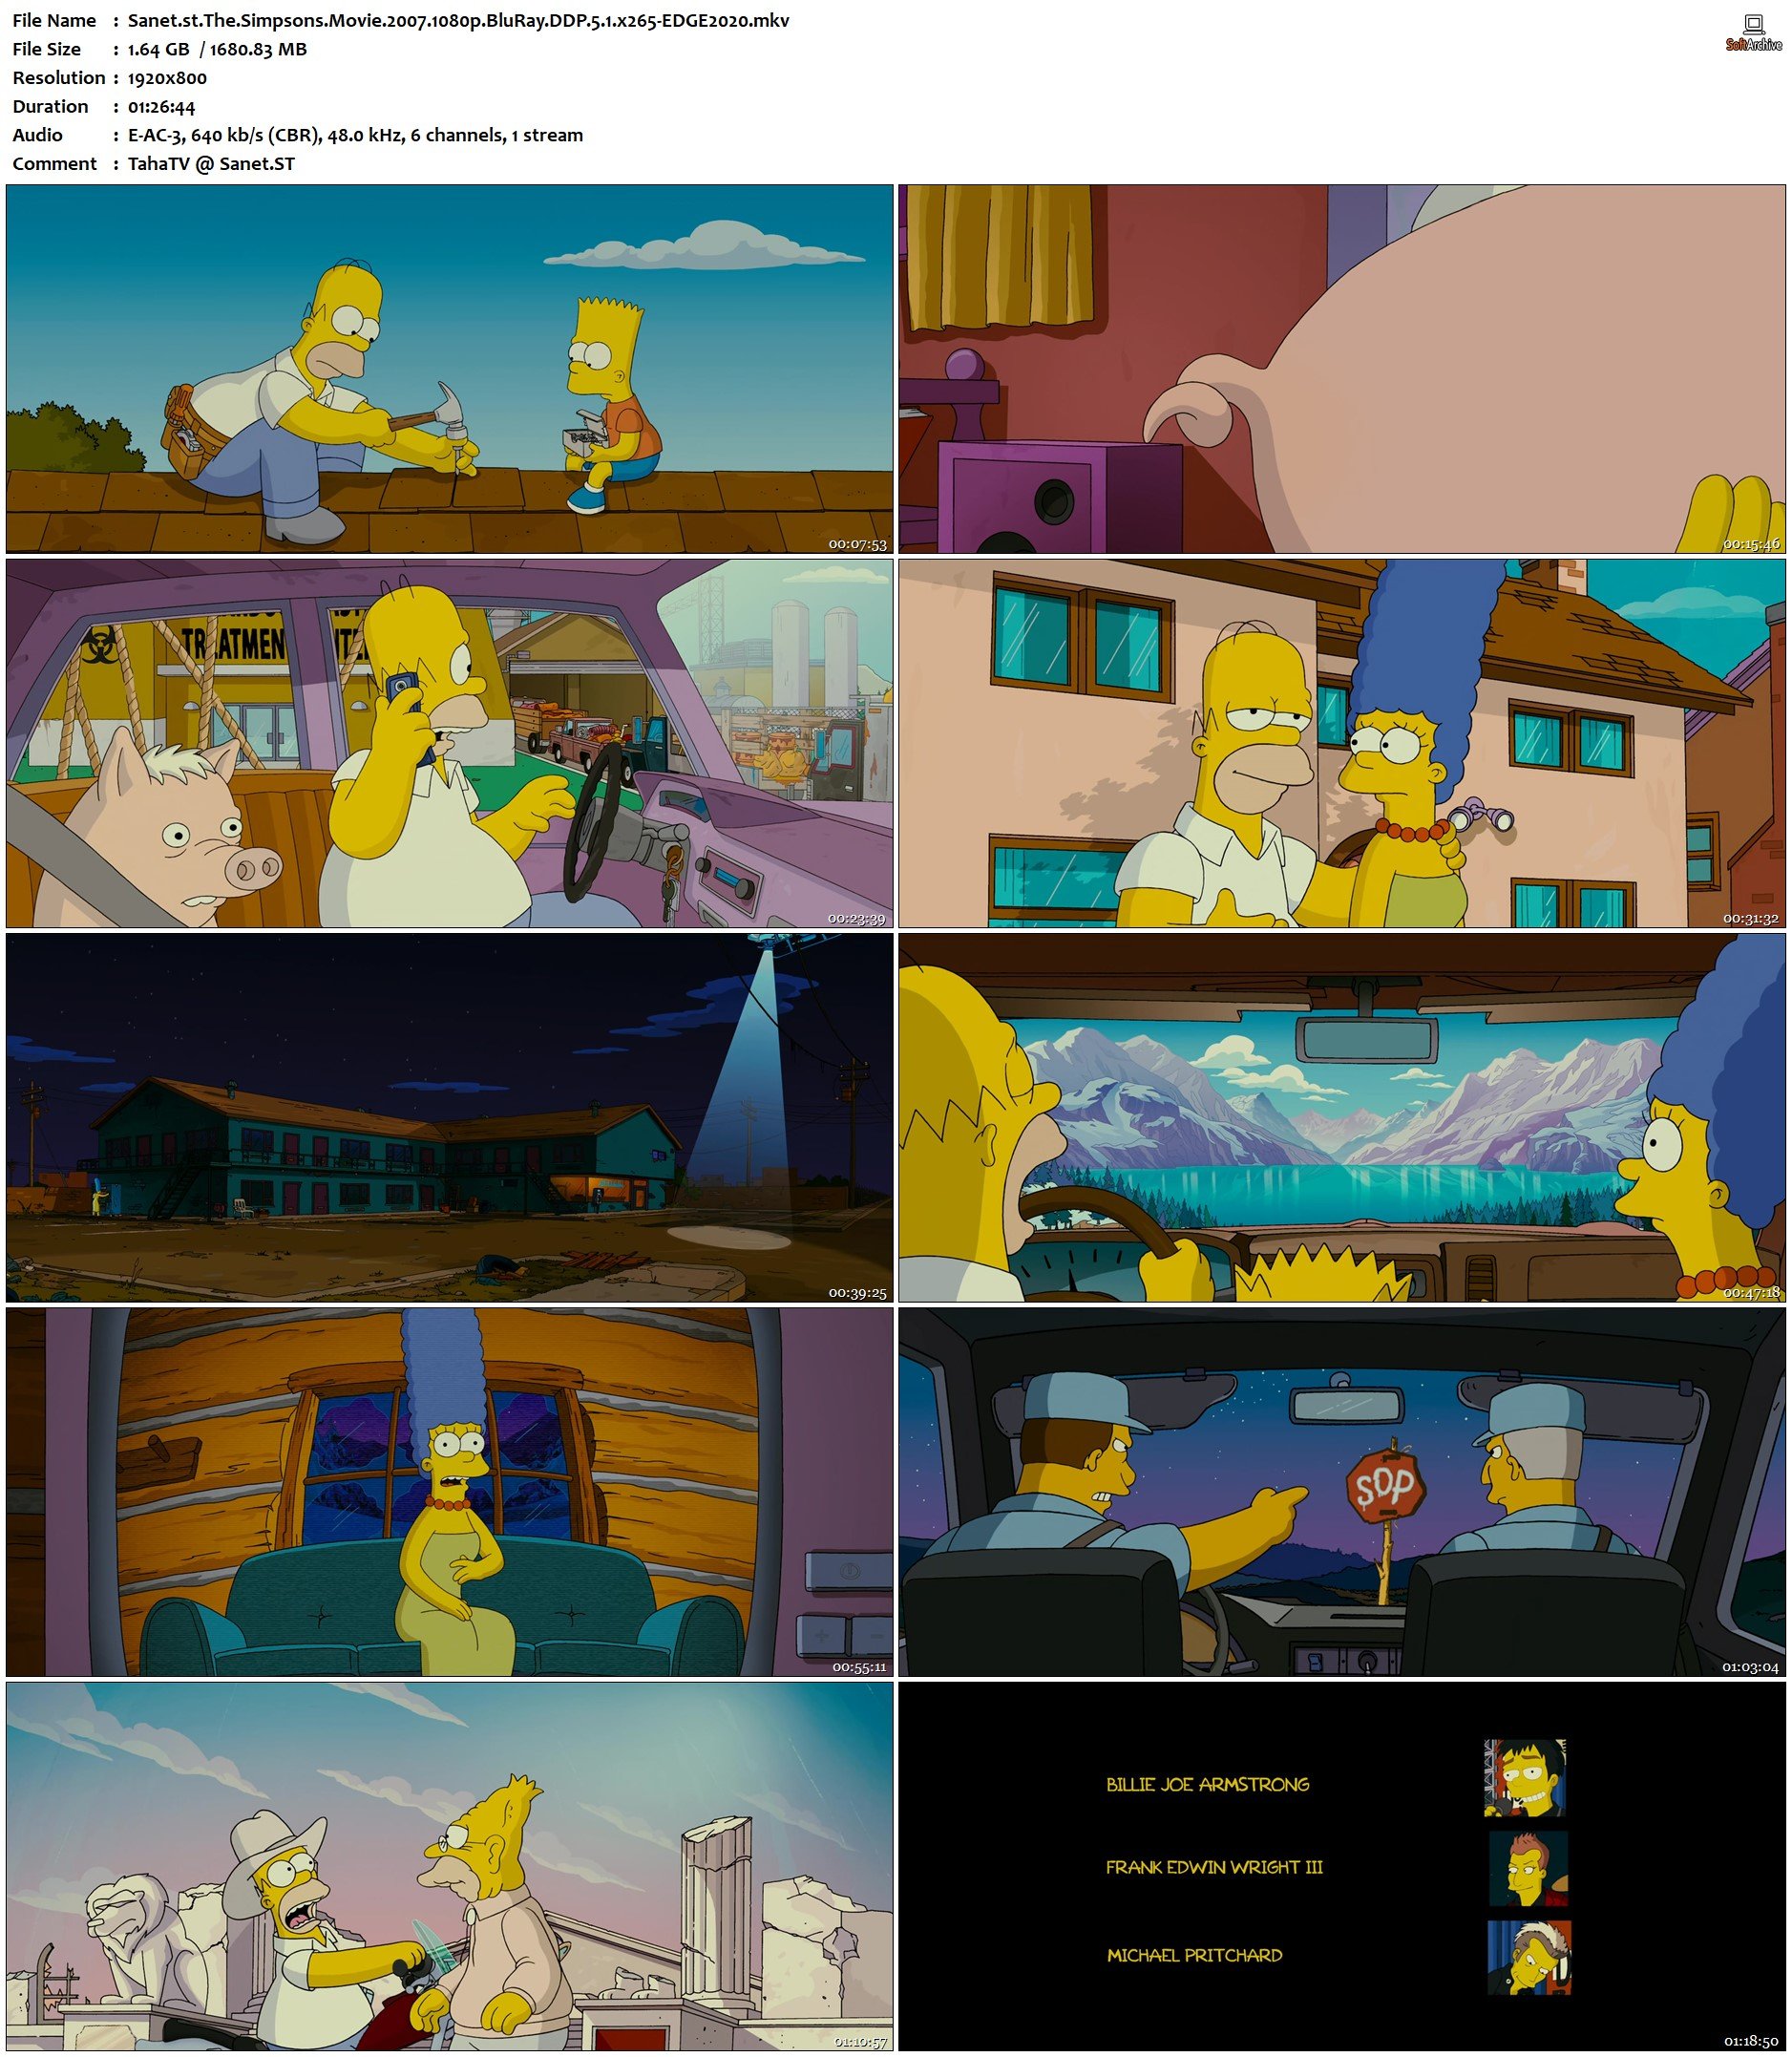 The Simpsons Movie 2007 1080p BluRay DDP 5.1 x265-EDGE2020 - SoftArchive